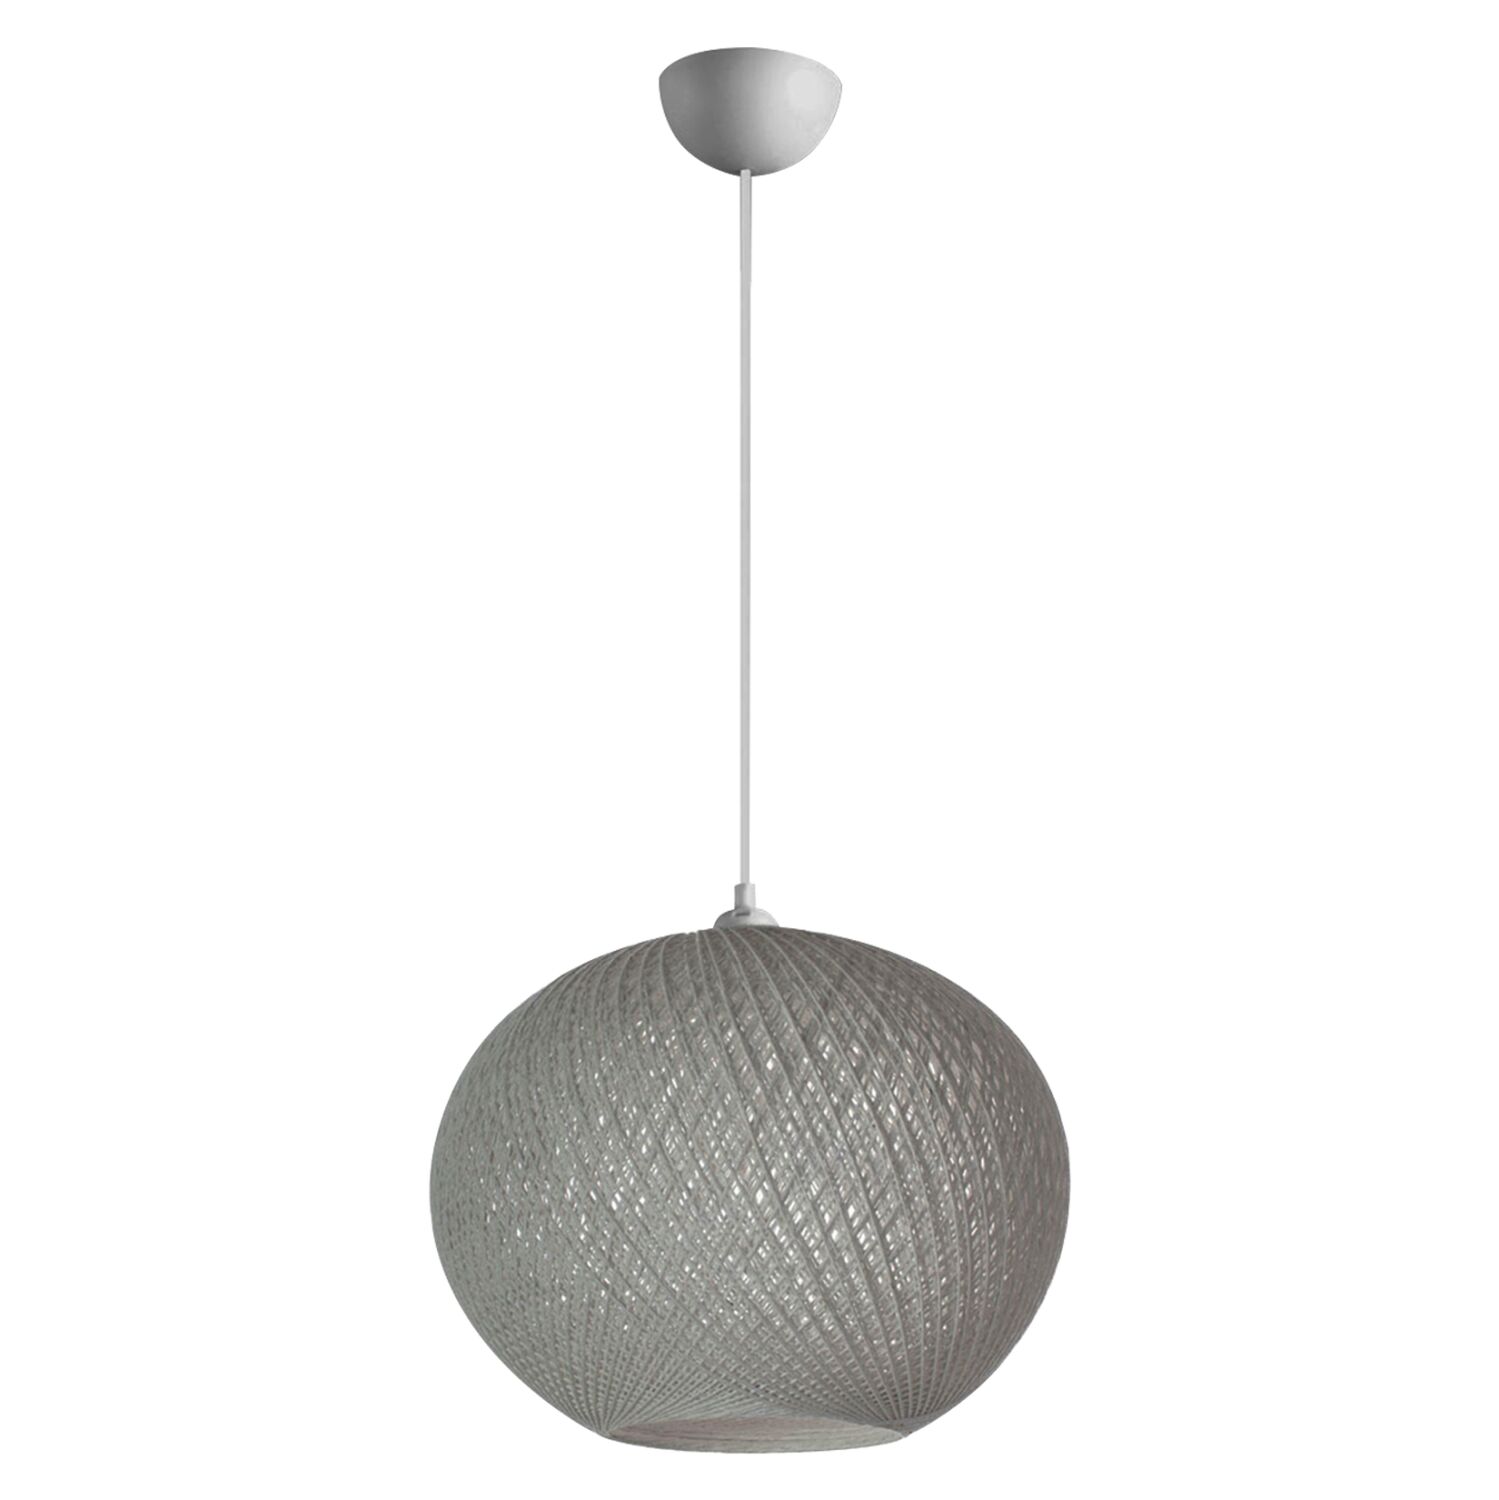 PENDANT CEILING LAMP HM7625.01 GREY SLIGHTLY OVAL-SHAPED SPHERE, KNITTED ROPE, INDOORS